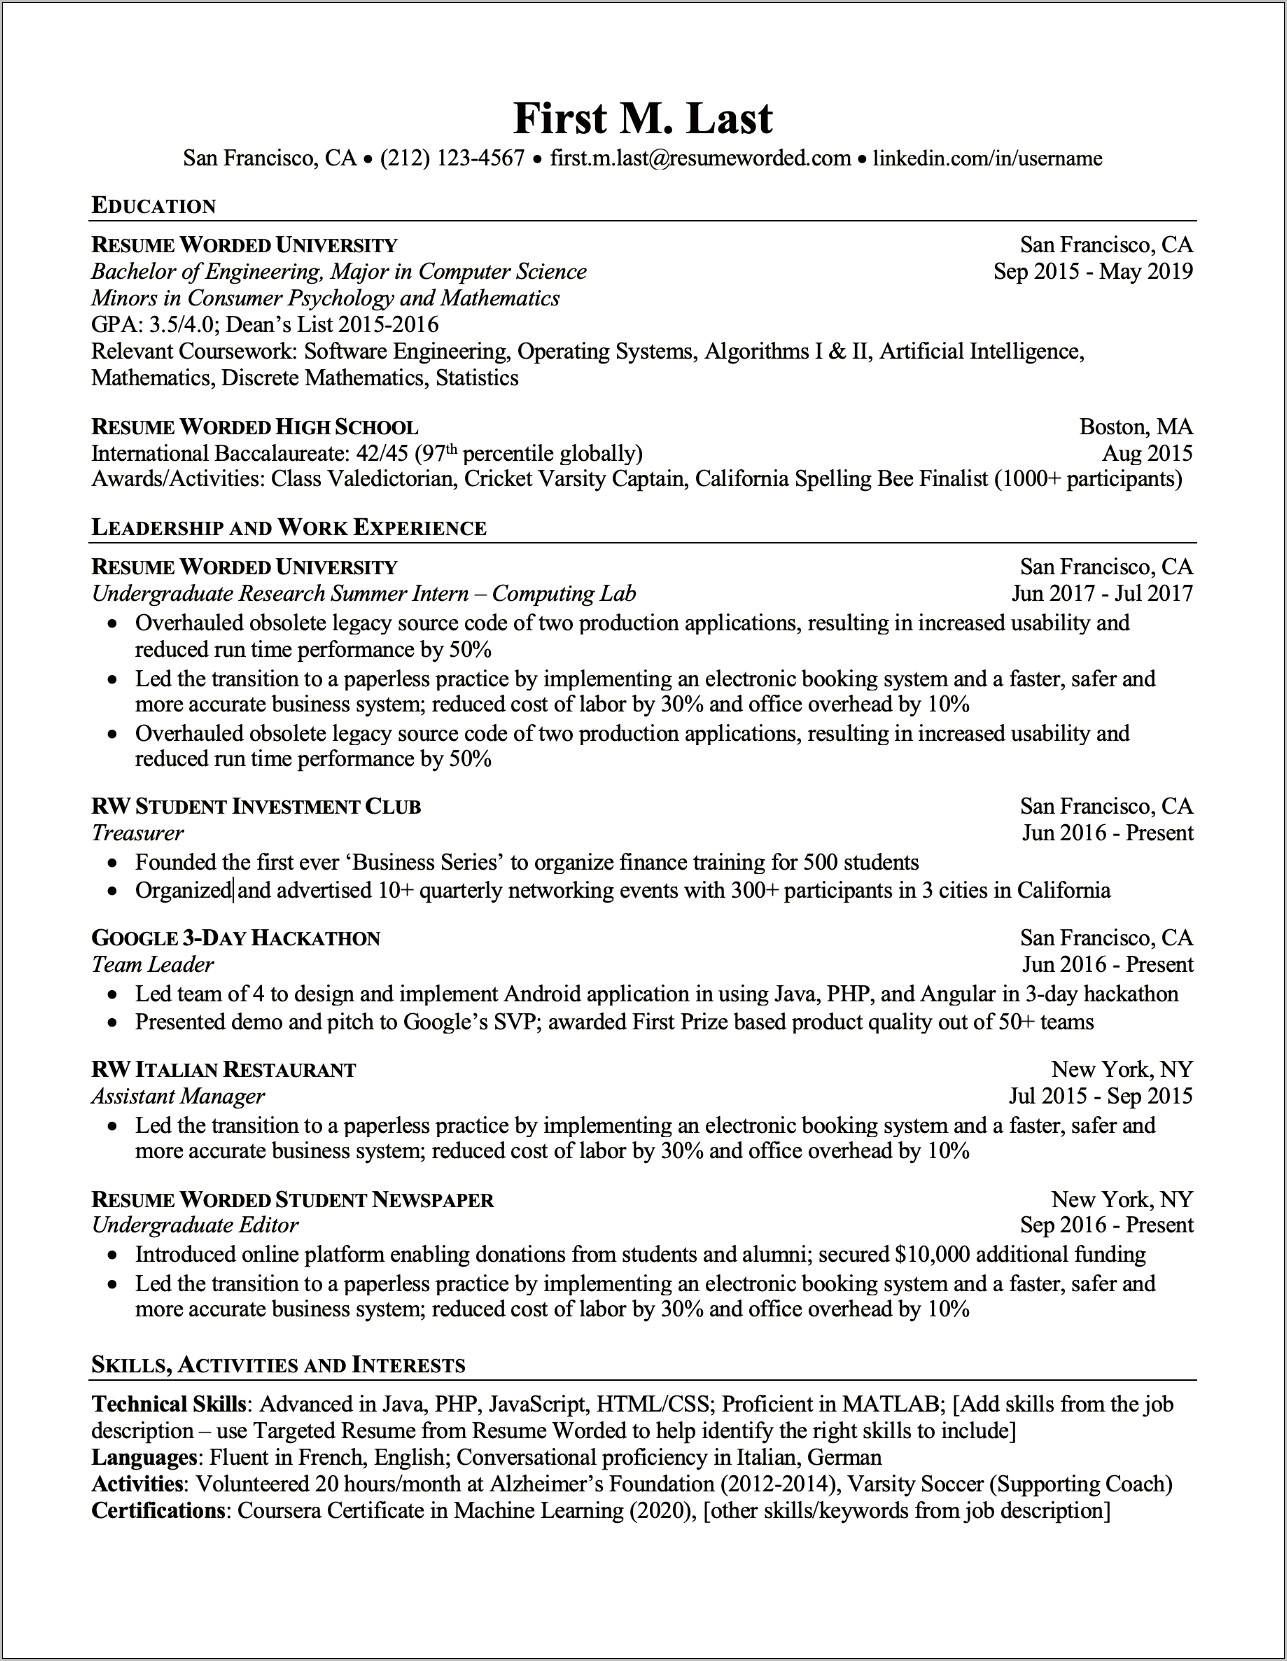 Are Microsoft Word Resume Templates Ats Friendly